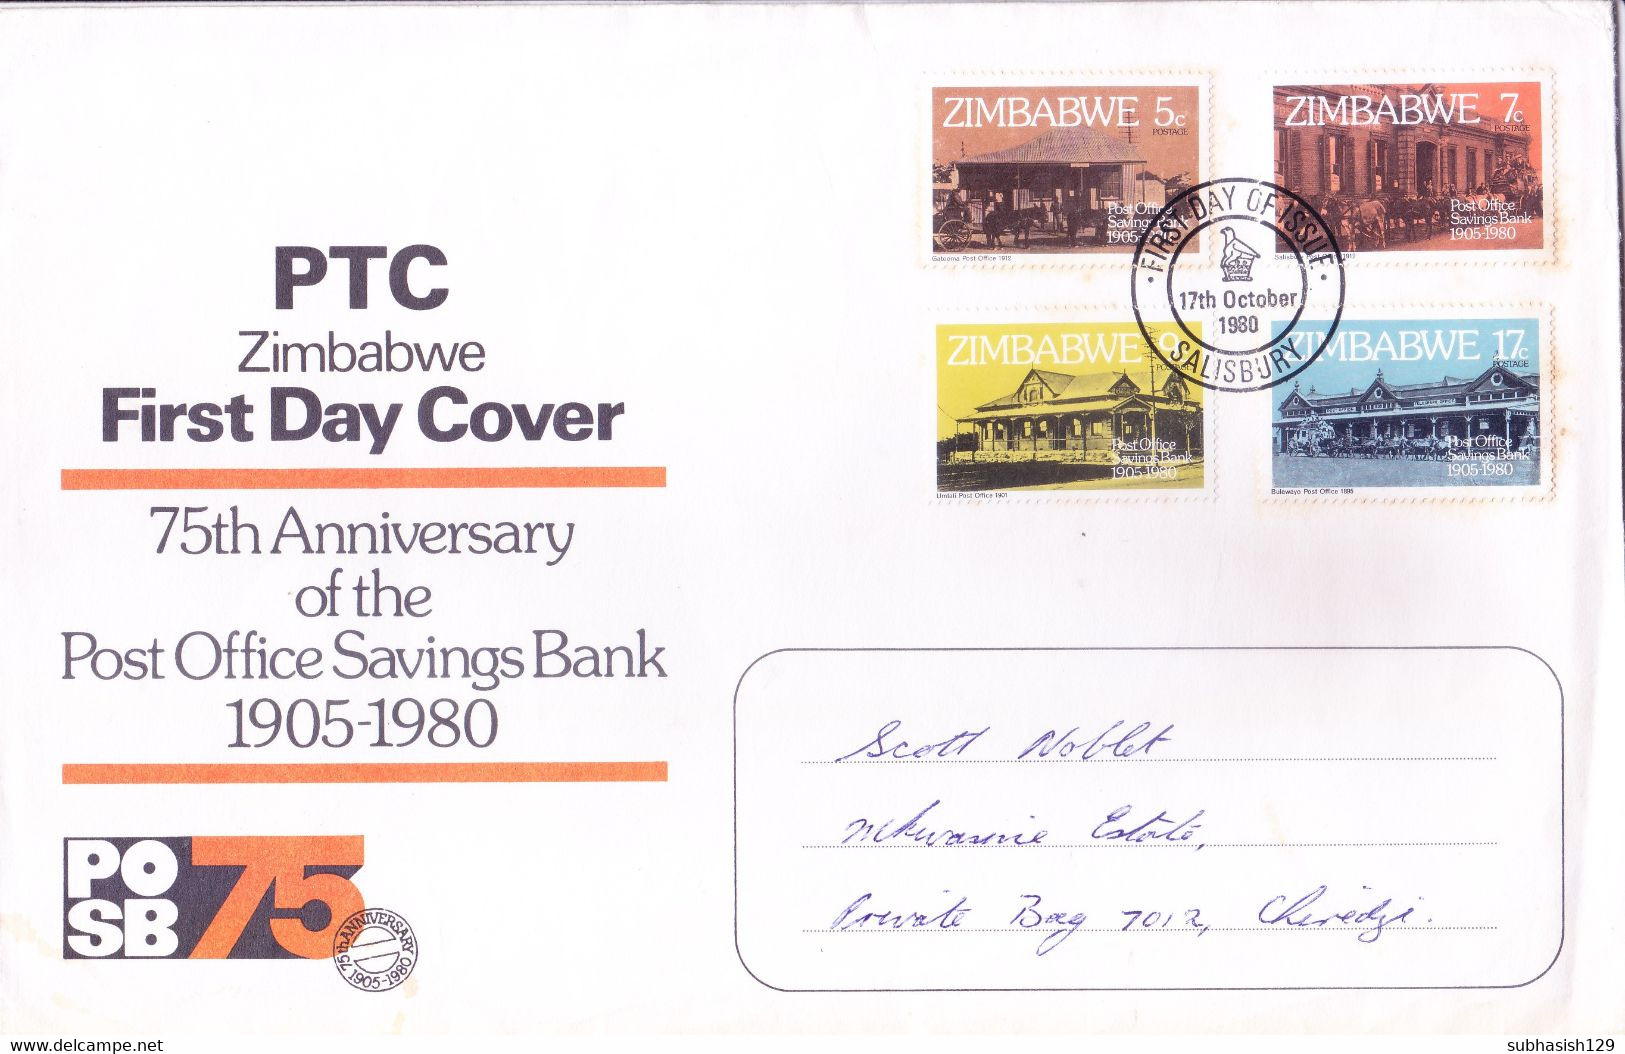 ZIMBABWE : FIRST DAY COVER : 17 OCTOBER 1980: 75TH ANNIVERSARY OF POST OFFICE SAVINGS BANK - Zambesia